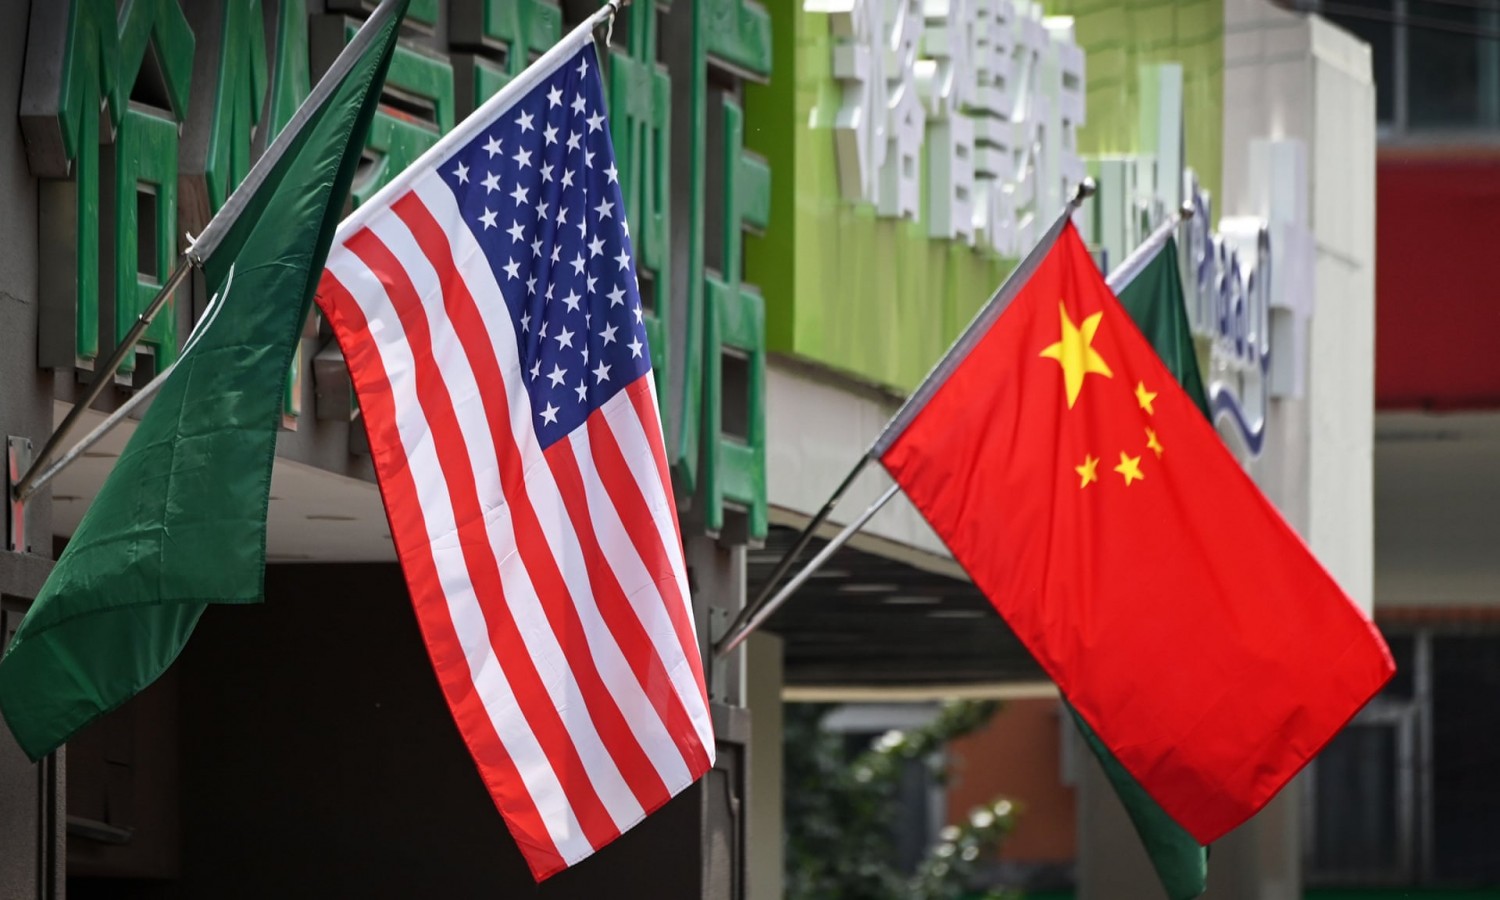 A source close to the talks said the US and China had struck a deal to end their 17-month trade war. Photograph: Greg Baker/AFP via Getty Images